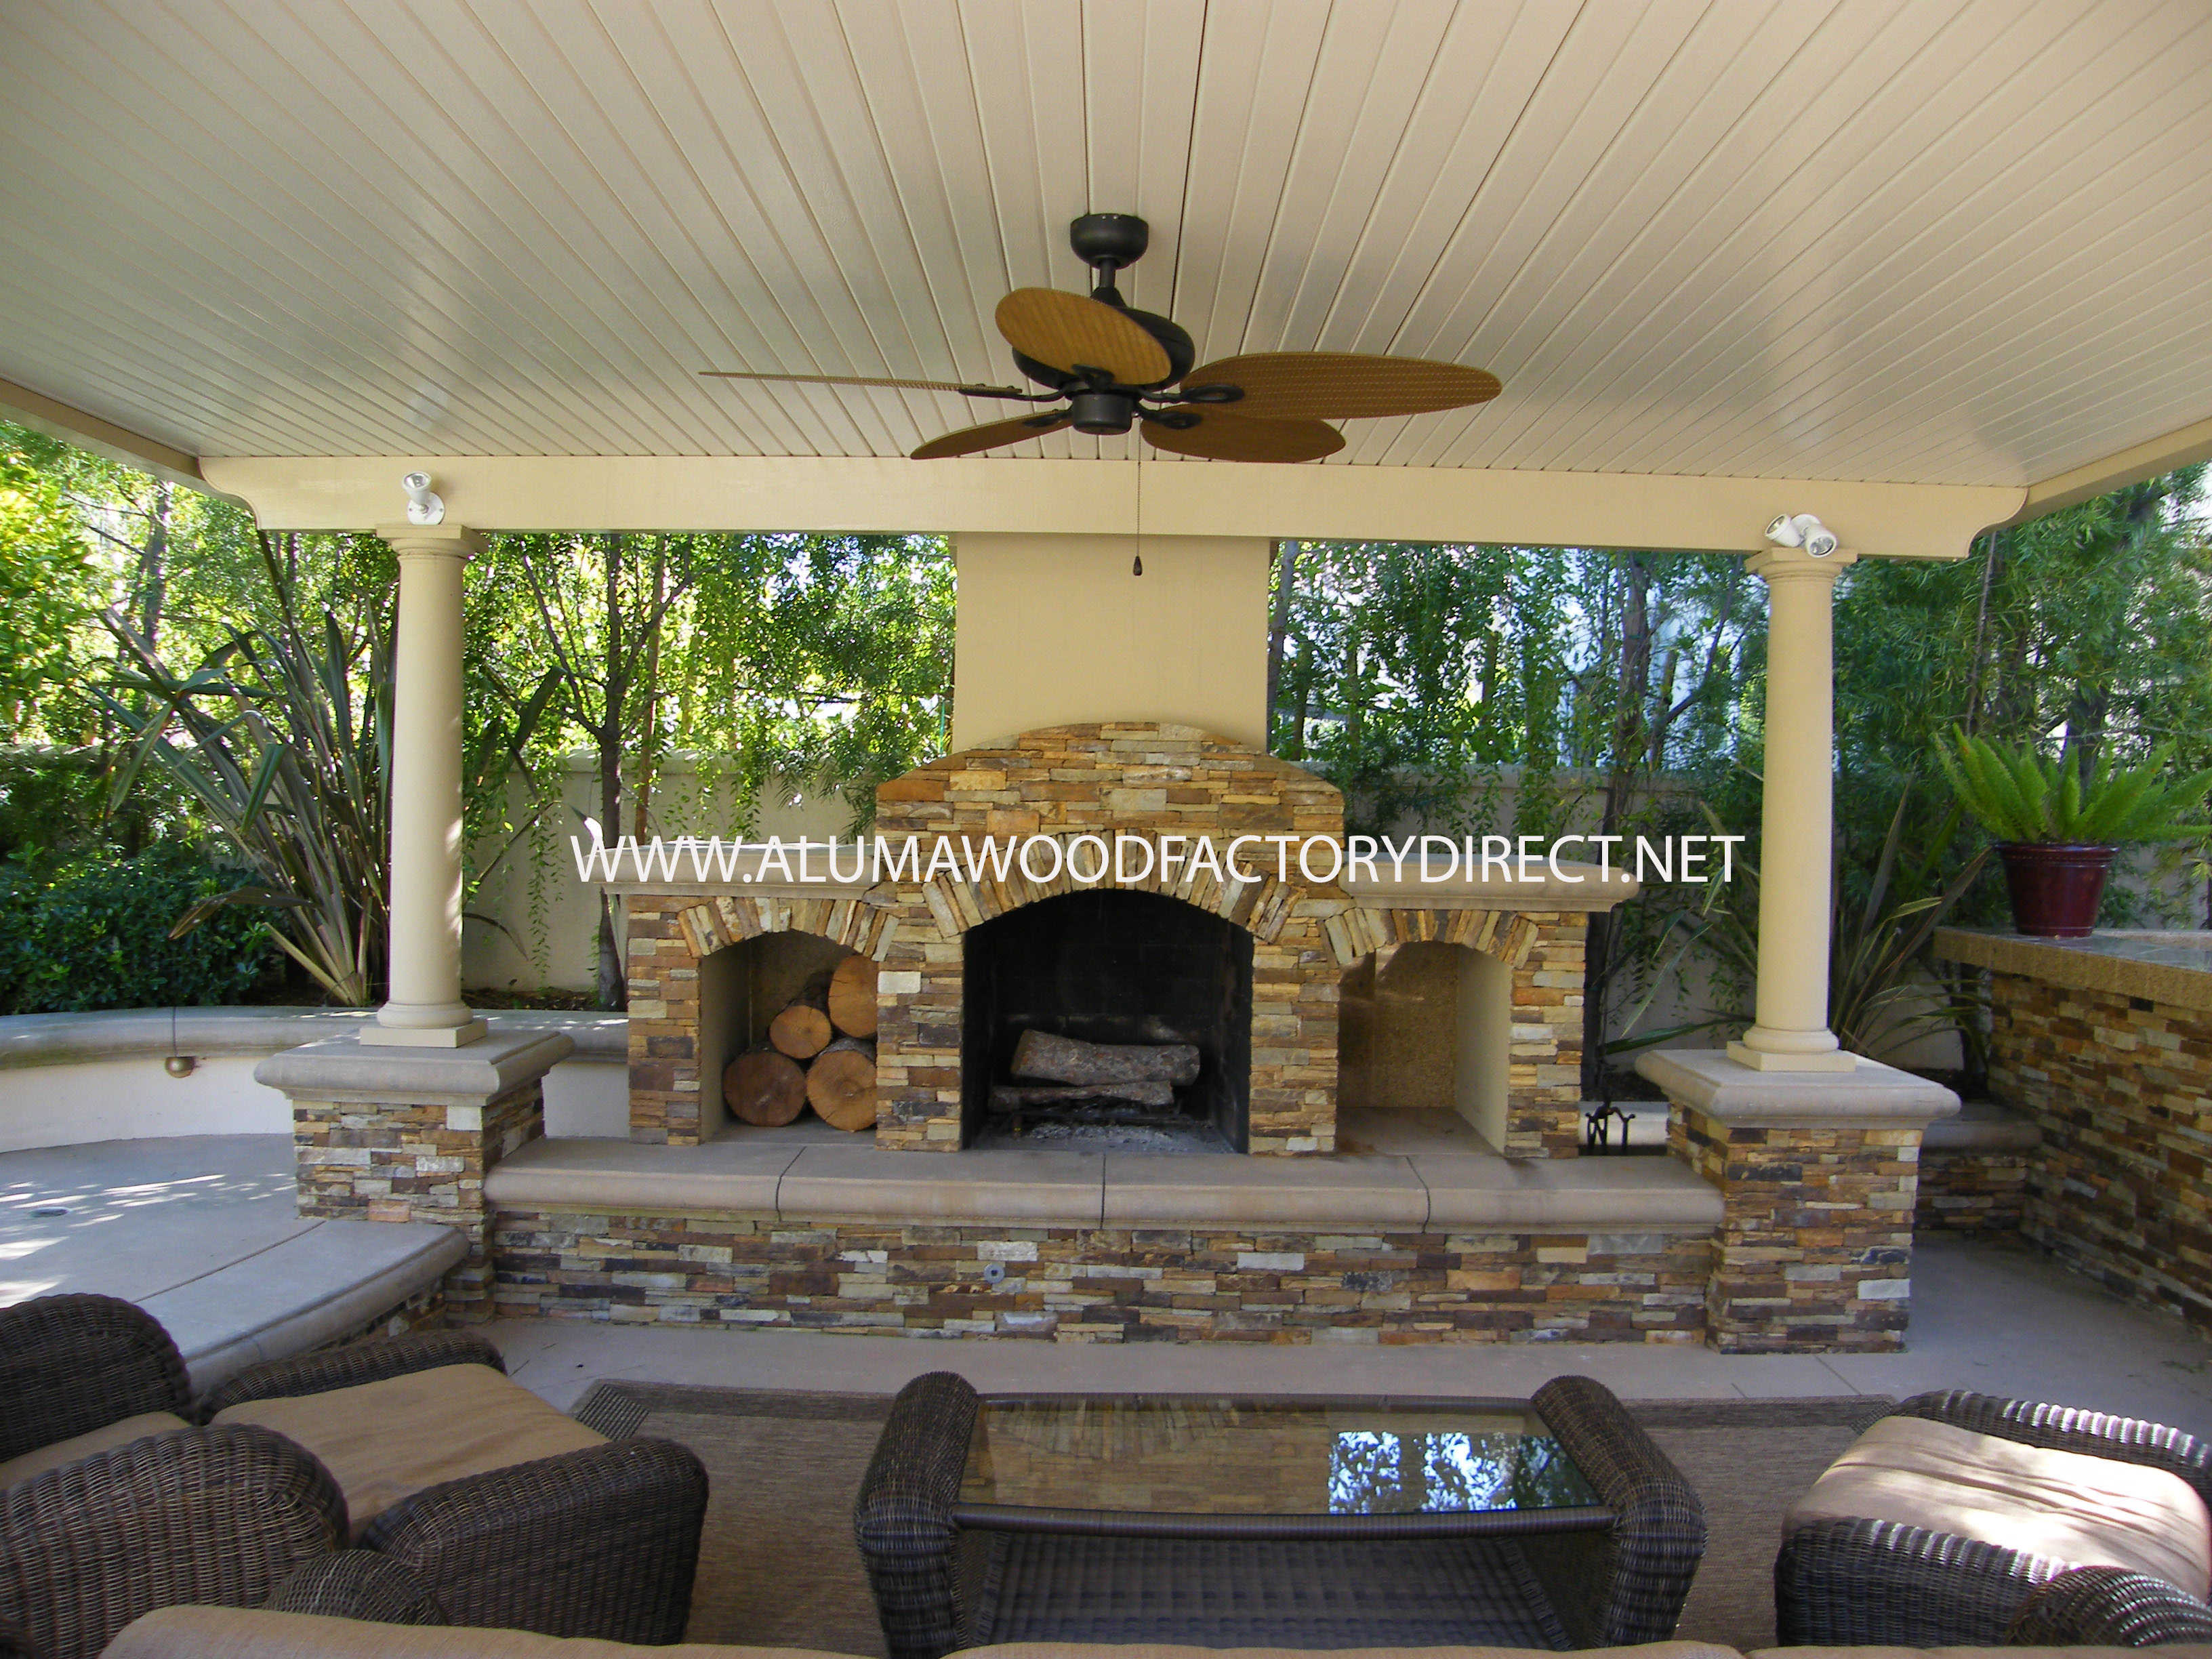 Alumawood Factory Direct Patio Covers, Backyard Covered Patio Cost